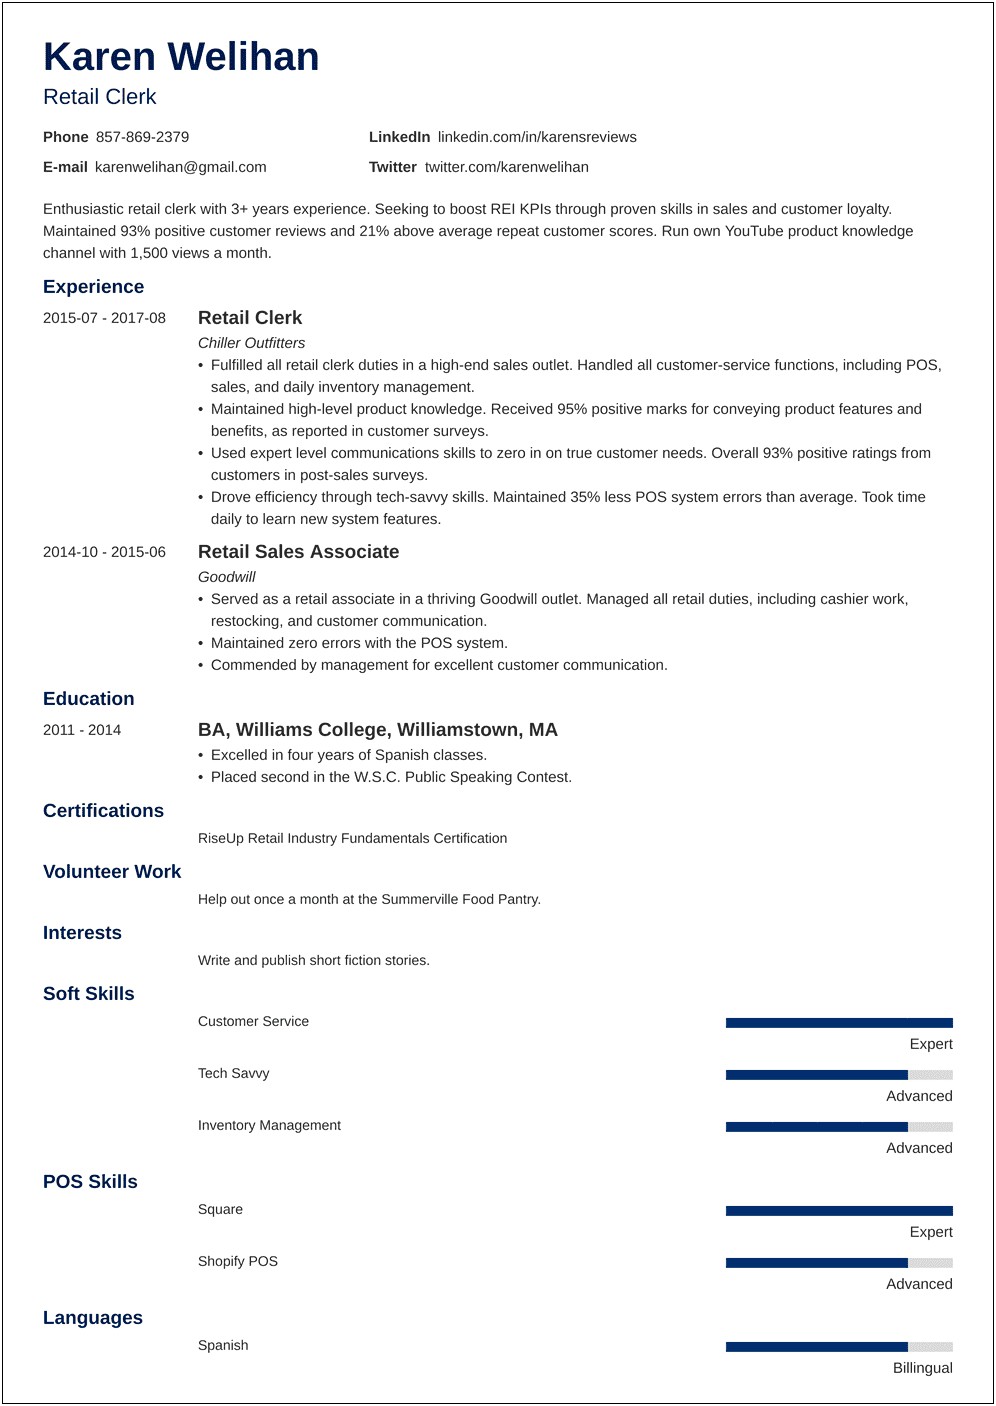 Real Skills To List For Retail Resume